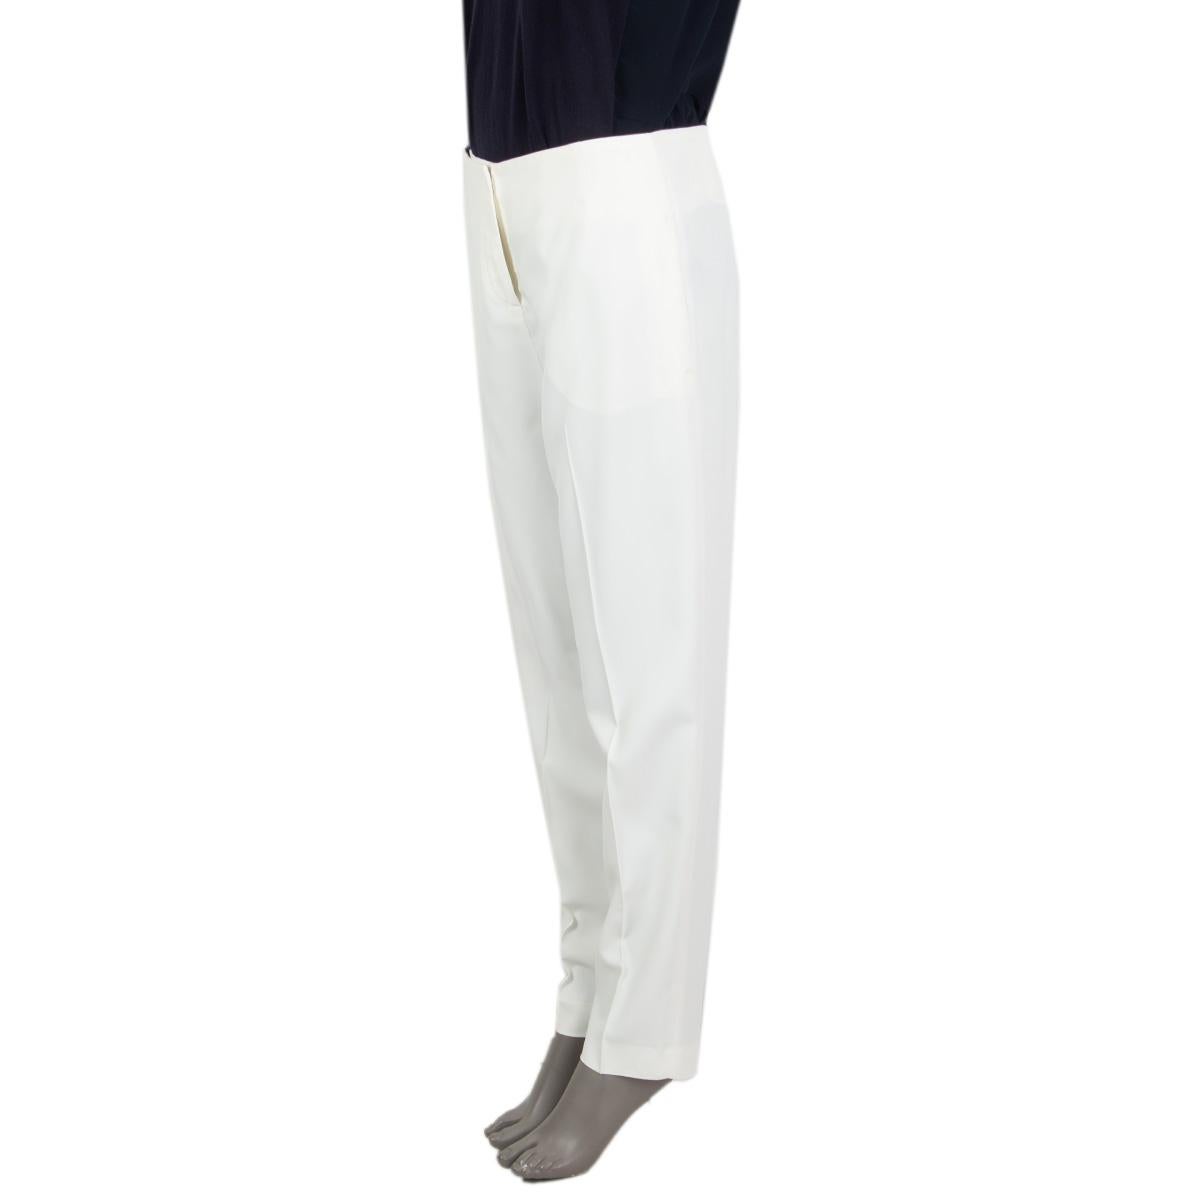 100% authentic Ermanno Scervino tapered pants in white viscose (97%) and elastan (3%) with slit pockets. Closes with one hook and a concealed zipper on the front. Lined in white acetate (60%) and cupro (40%). Has been worn and is in excellent